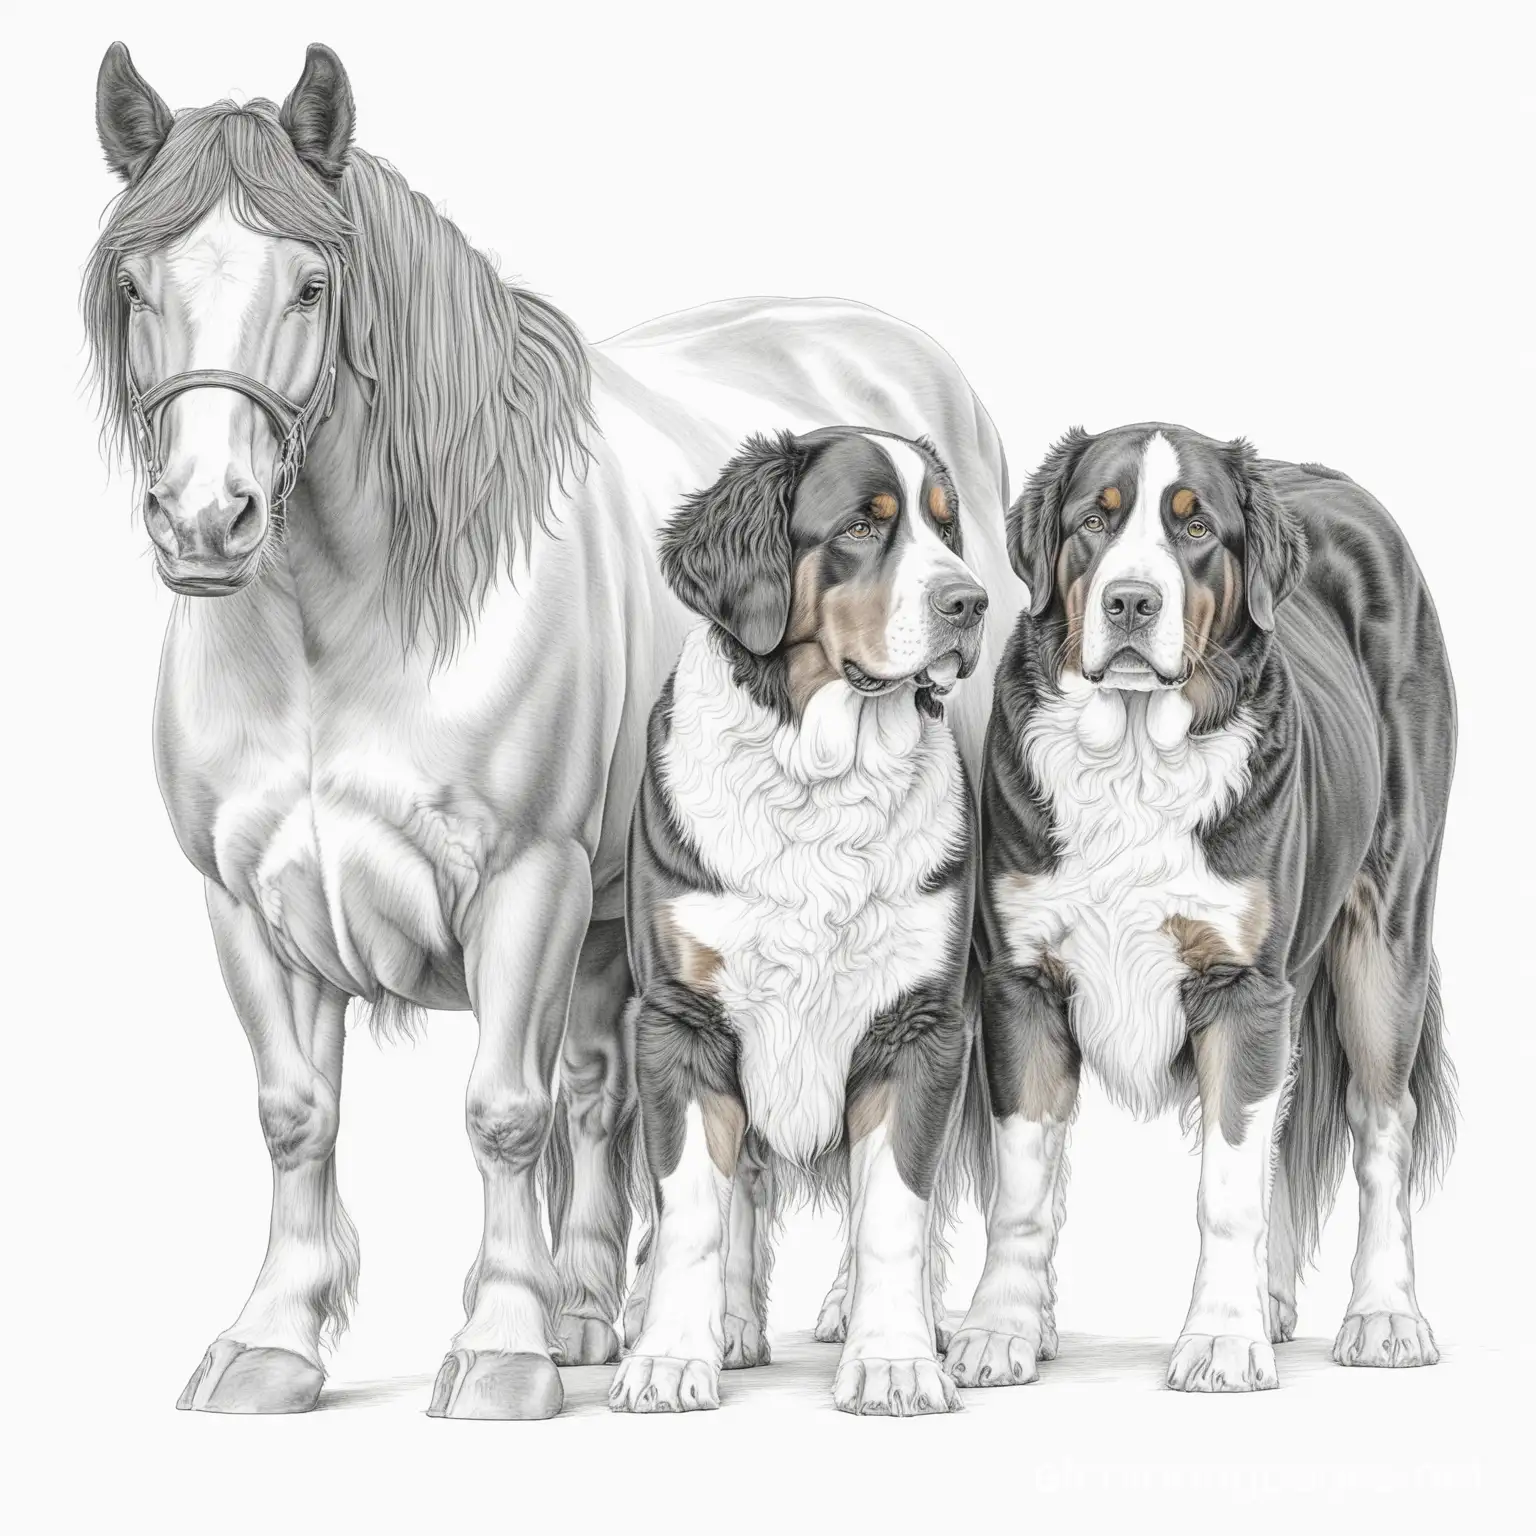 2 Bernese mountain dogs and a horse, Coloring Page, black and white, line art, white background, Simplicity, Ample White Space. The background of the coloring page is plain white to make it easy for young children to color within the lines. The outlines of all the subjects are easy to distinguish, making it simple for kids to color without too much difficulty